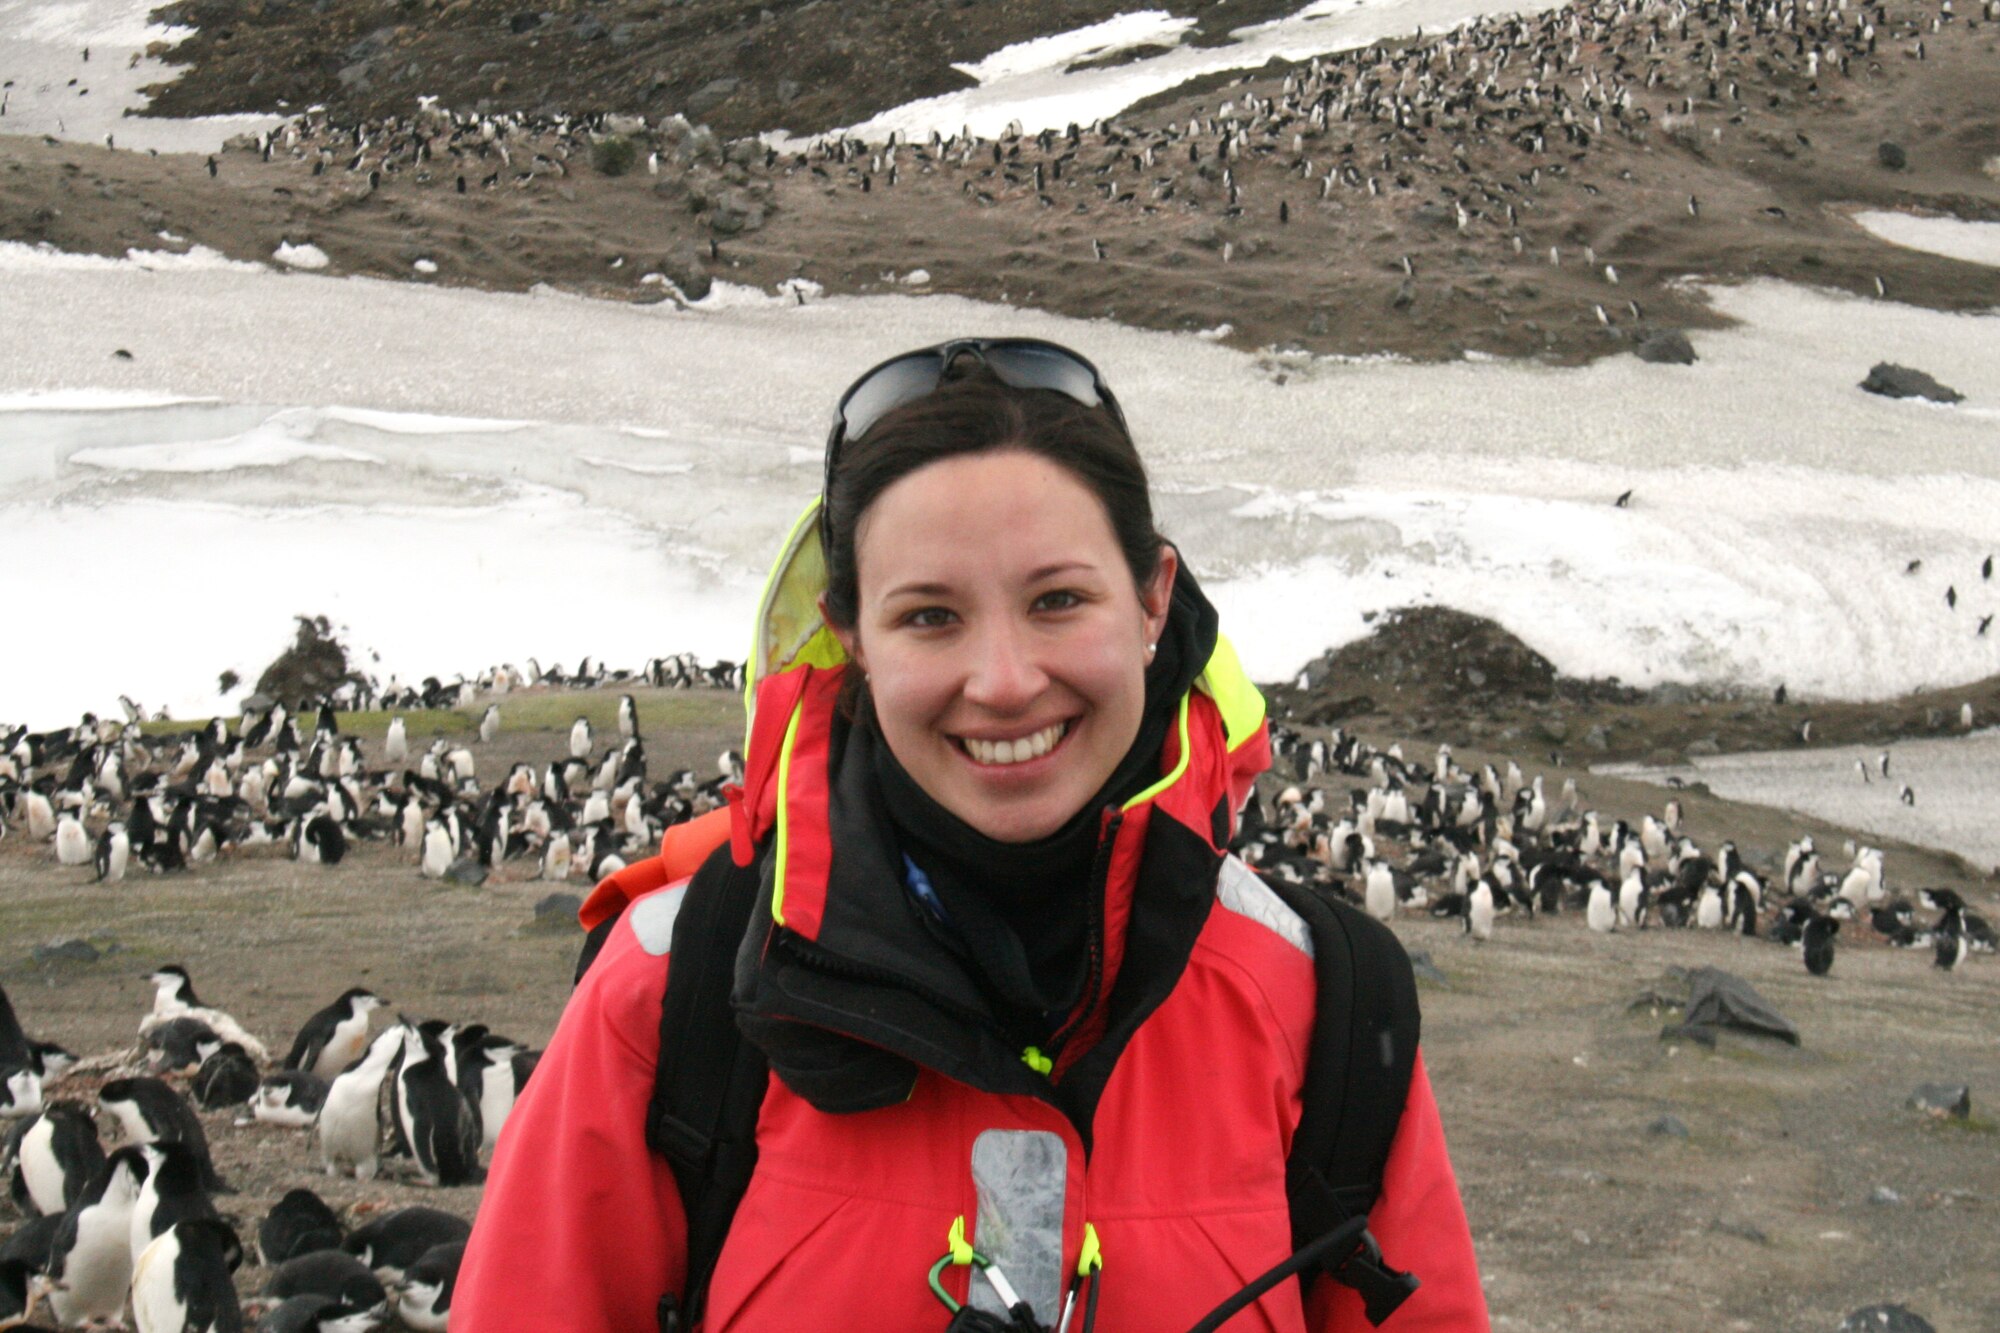 Capt. Hila Levy, an Air Force Reserve Individual Mobilization Augmentee, during a recent research trip to study penguins in the Antarctic. Levy is a doctoral student at Oxford University and a leader in the field of penguin research and genetics. She also serves her country as a Reserve intelligence officer at the Joint Reserve Intelligence Support Element, Royal Air Force Molesworth, United Kingdom, where she is the division chief of training.